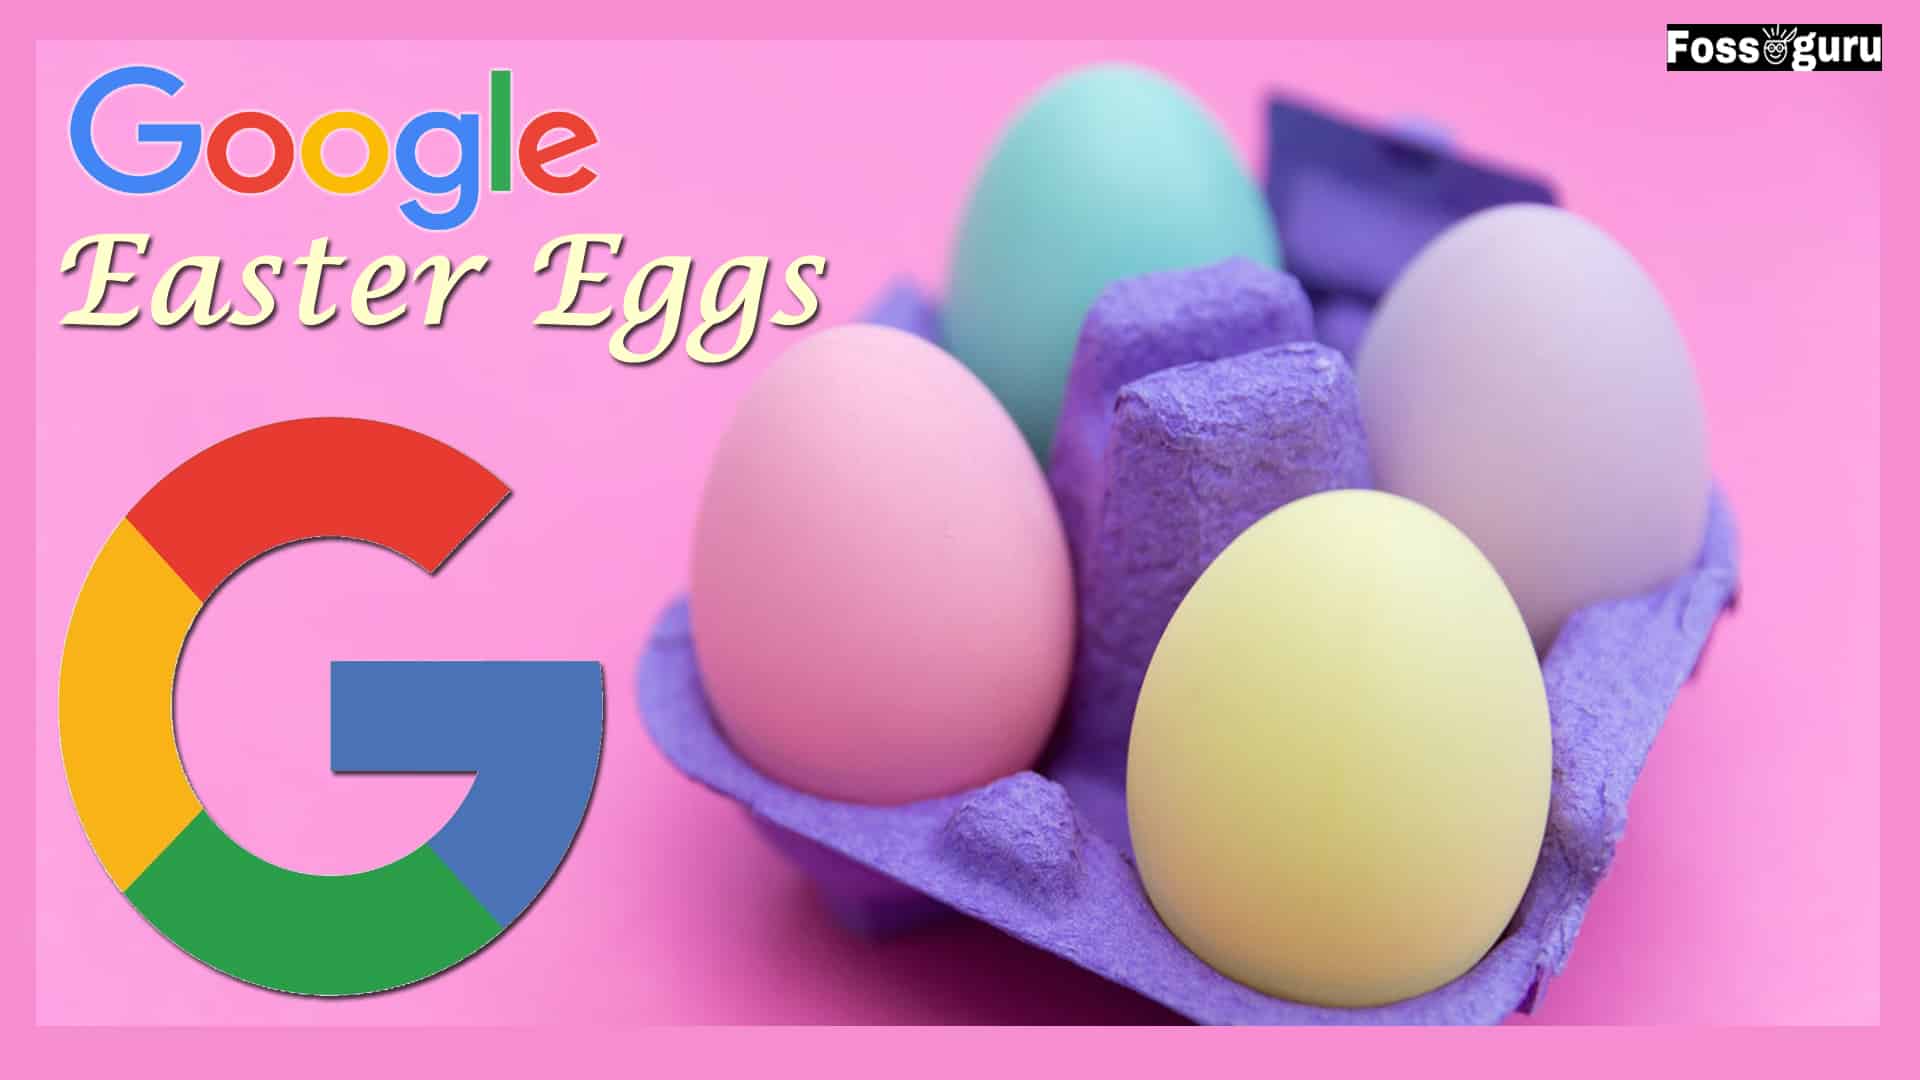 The 36 Best Google Easter Eggs Games to Make Fun in 2023